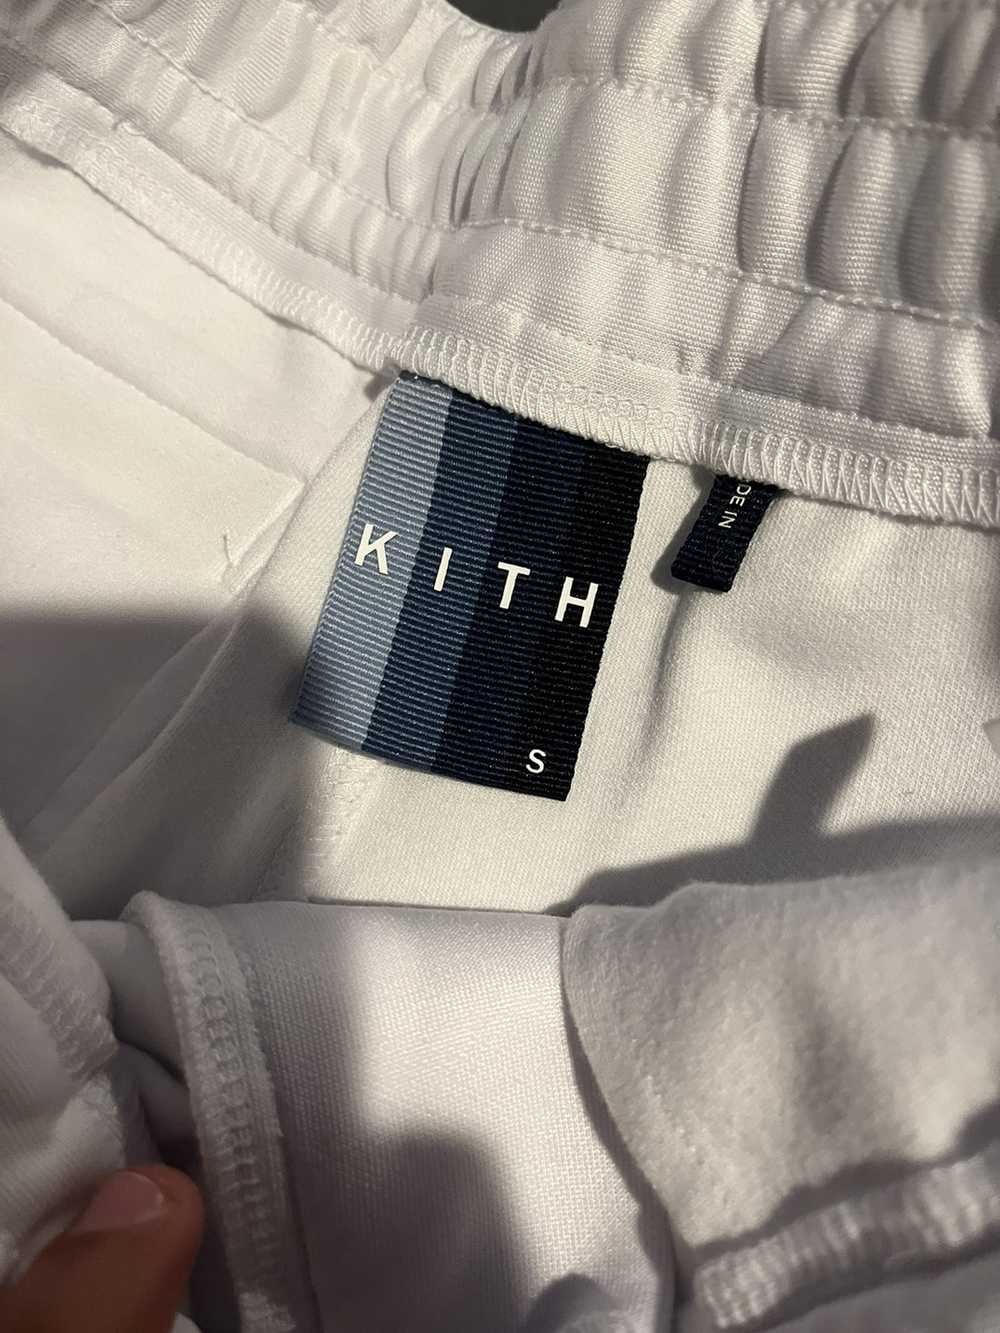 Kith Kith White with Green Stripe Casual Track pa… - image 8